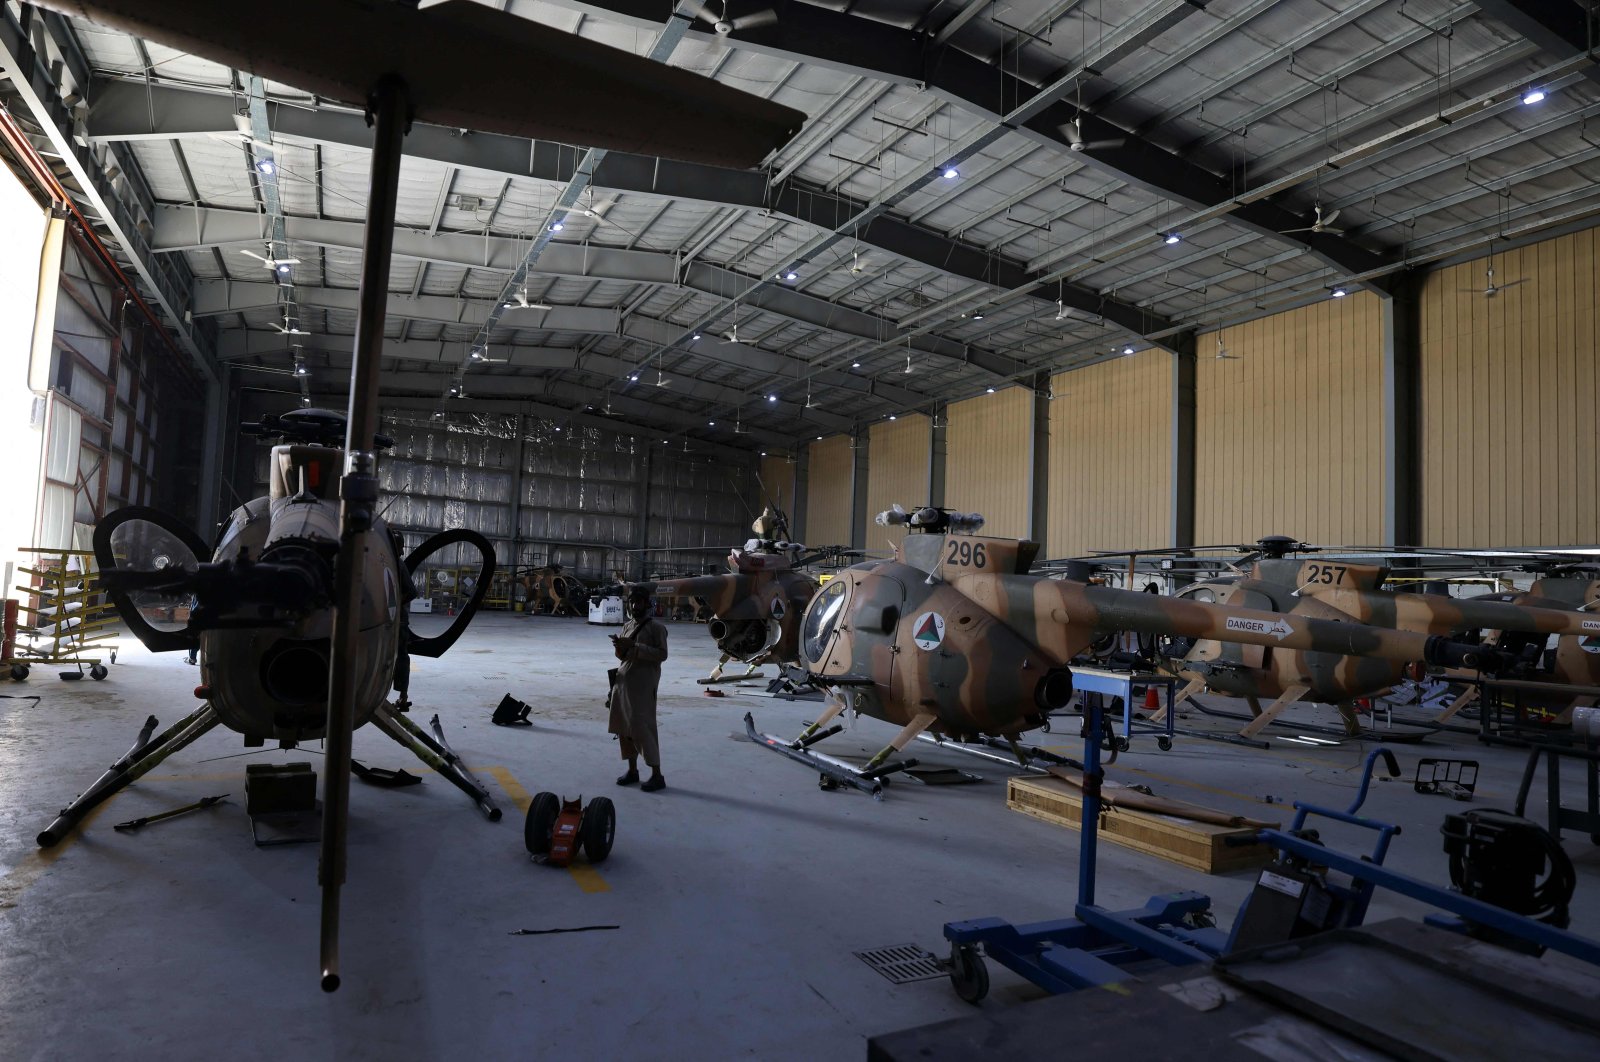 A Taliban fighter stands next to damaged Afghan Air Force helicopters at a hangar at Kabul airport on Sept. 14, 2021. (AFP Photo)